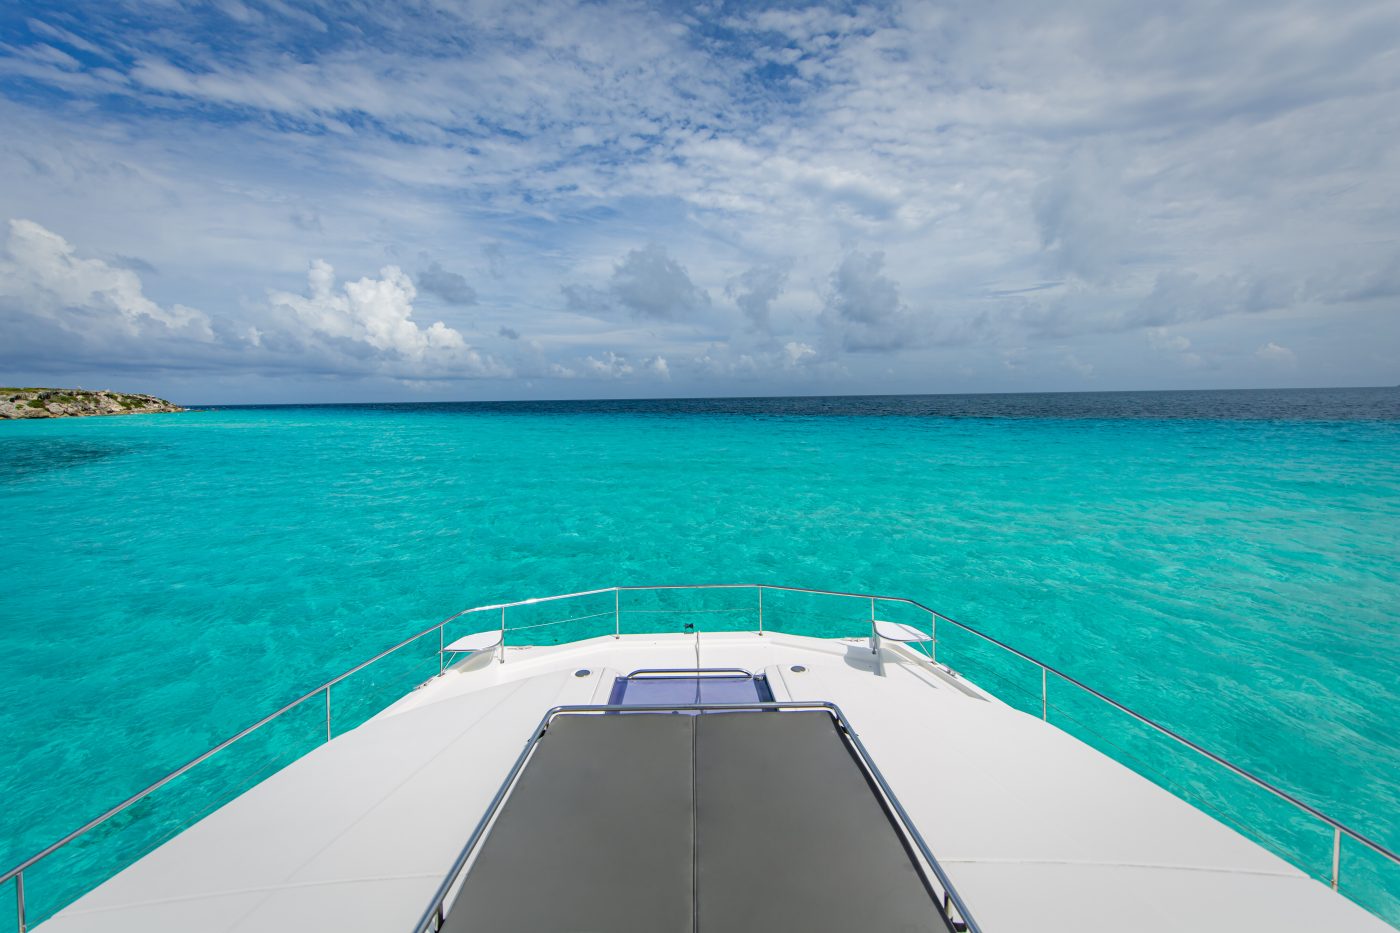 Leopard Catamaran for Luxury Yacht Charters from Cancun Caribbean